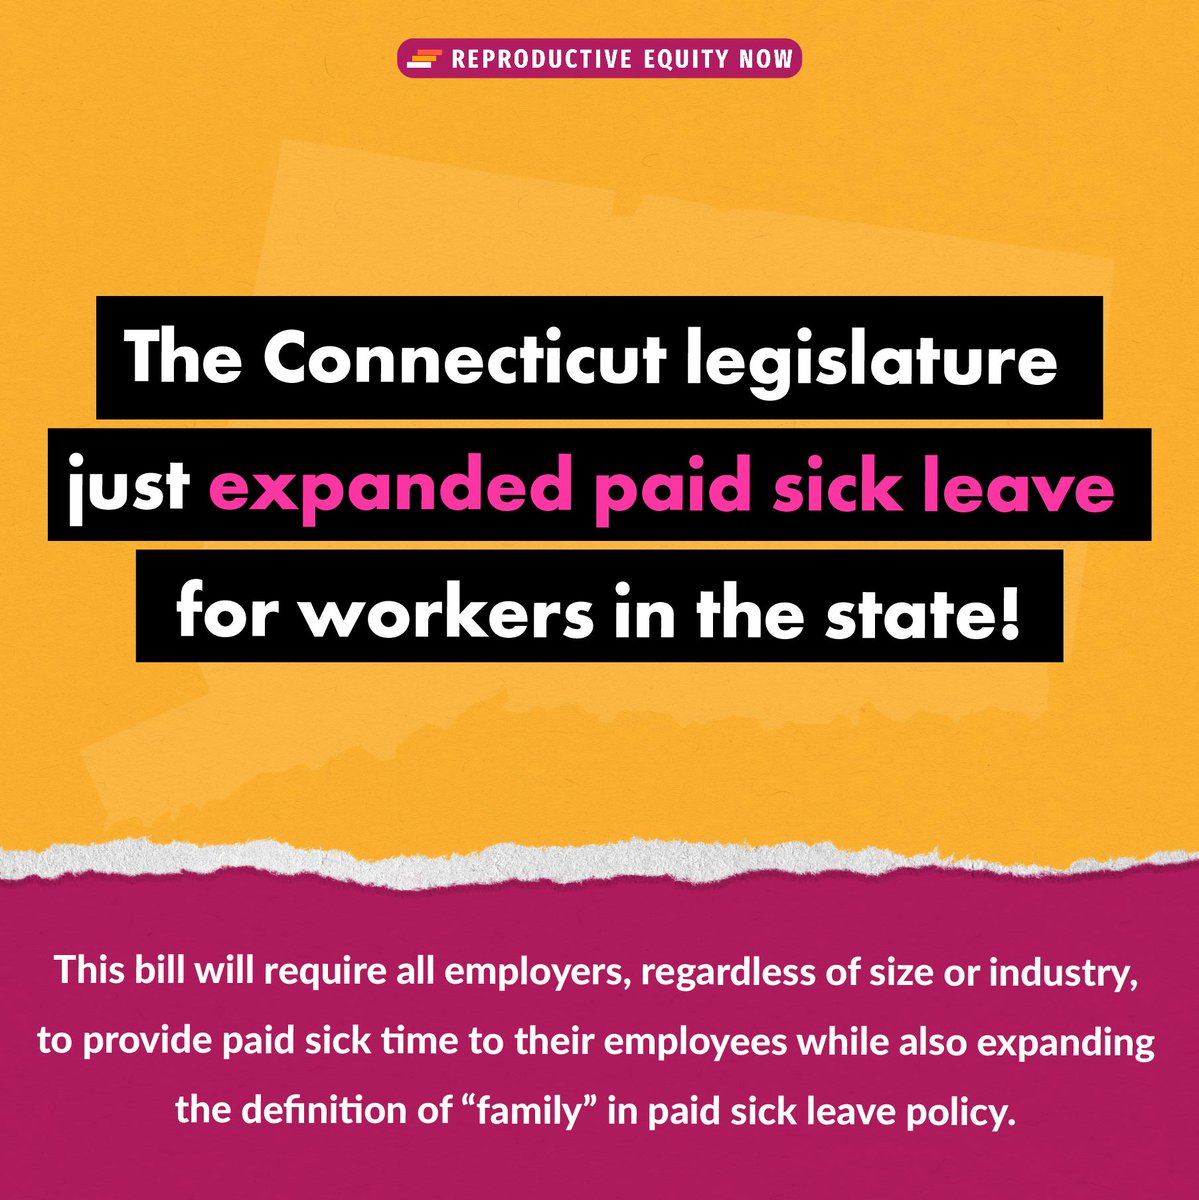 Last night, the Connecticut State Senate passed a bill to expand paid sick leave for workers across the state! The bill now heads to Governor Lamont’s desk for his signature. This is a huge win for equity and for families across the Nutmeg State! 🎊